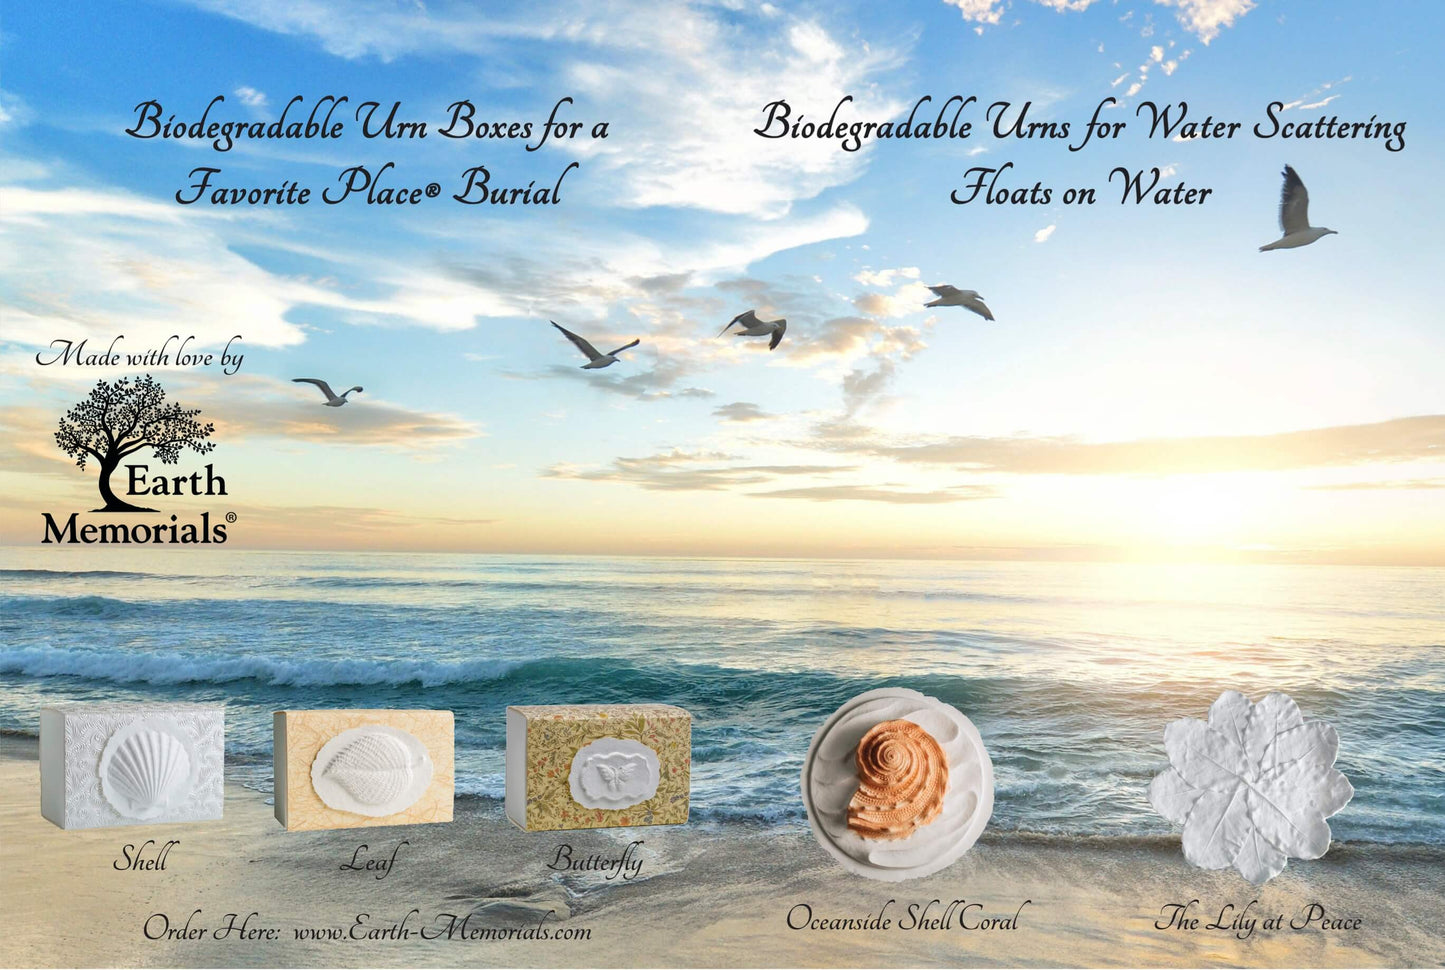 Fish Small - The FAVORITE PLACE® Small Burial Biodegradable Urn for Human Ashes, Ocean or Earth Burial Urn for Cremation